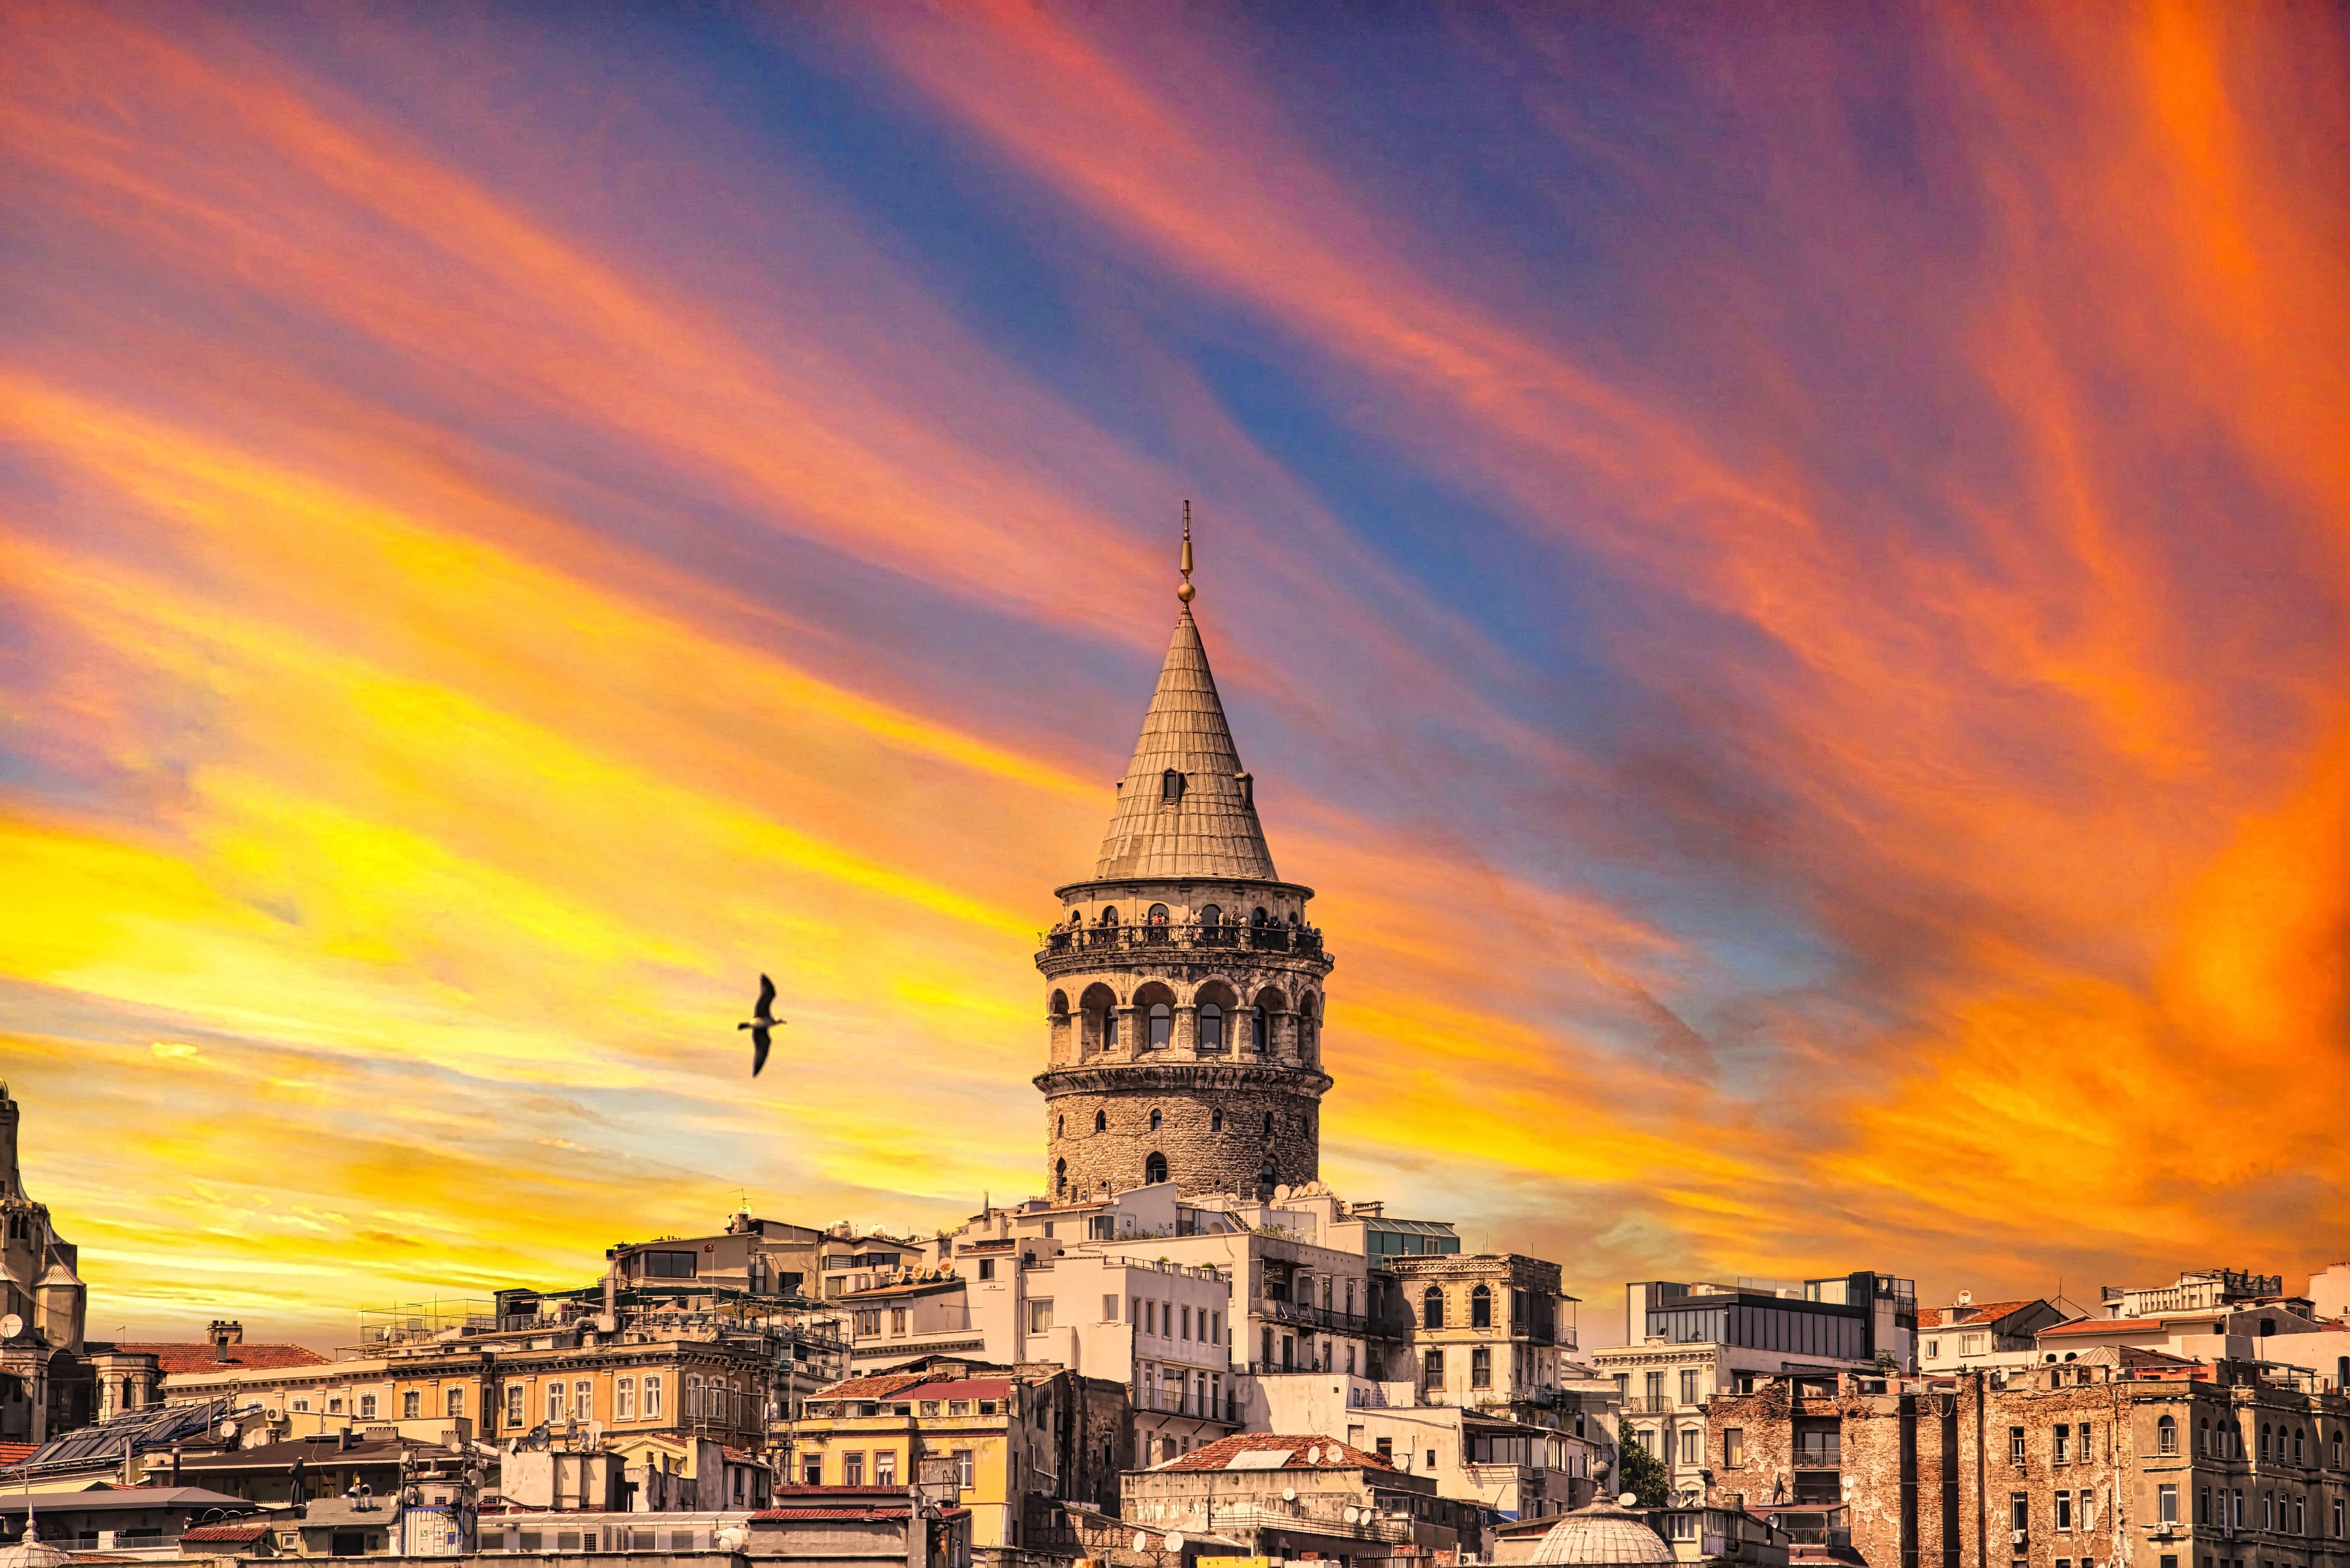 View of Galata Tower